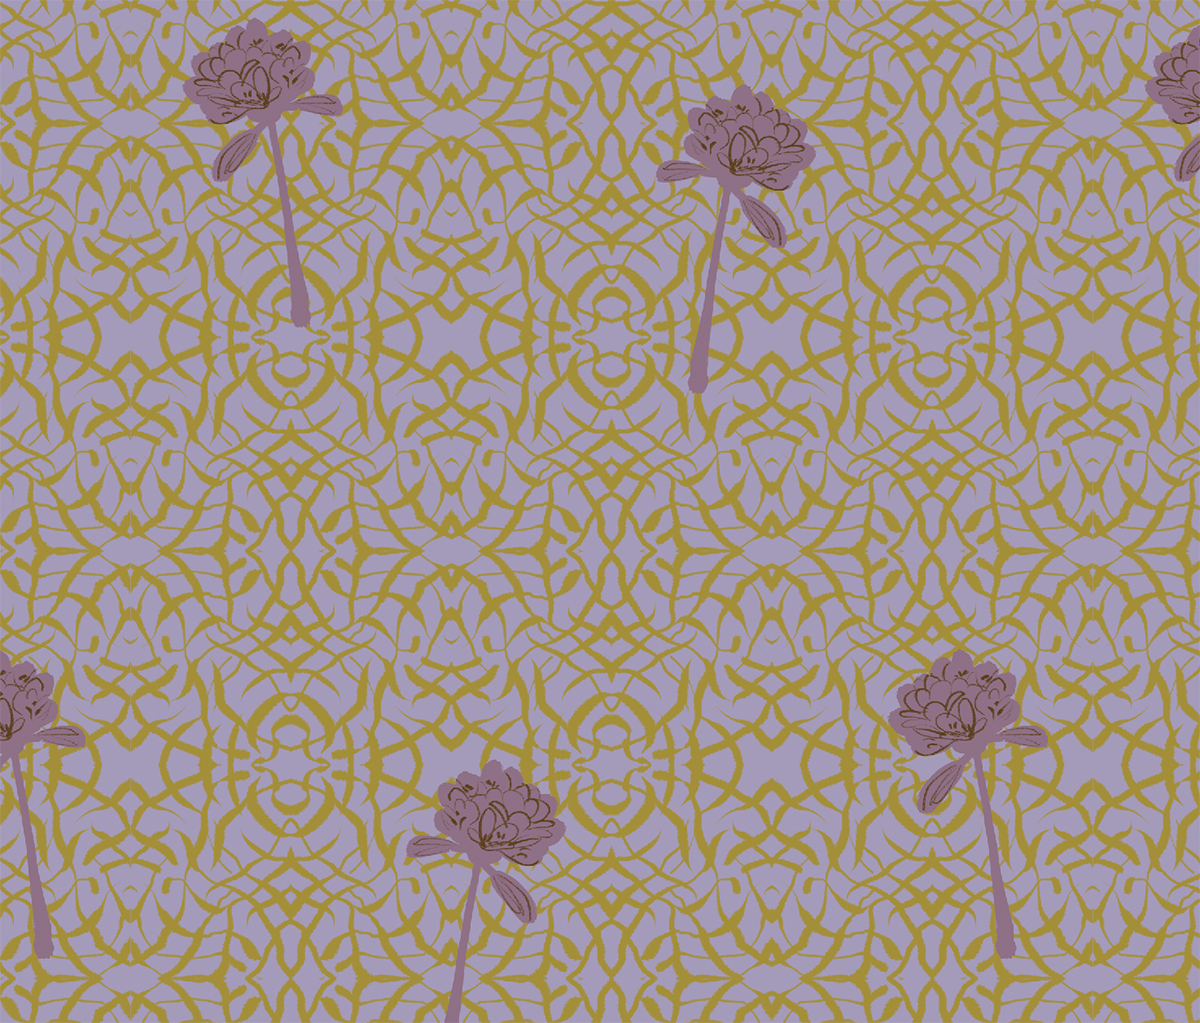 Salone pattern with flowers